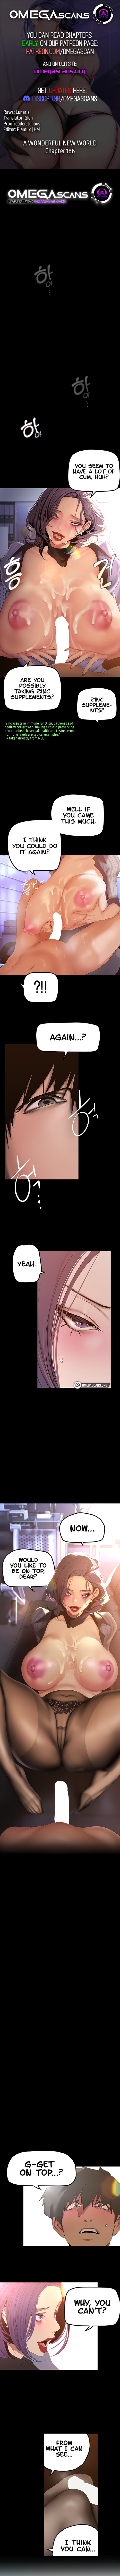 Panel Image 1 for chapter 186 of manhwa A Wonderful New World on read.oppai.stream